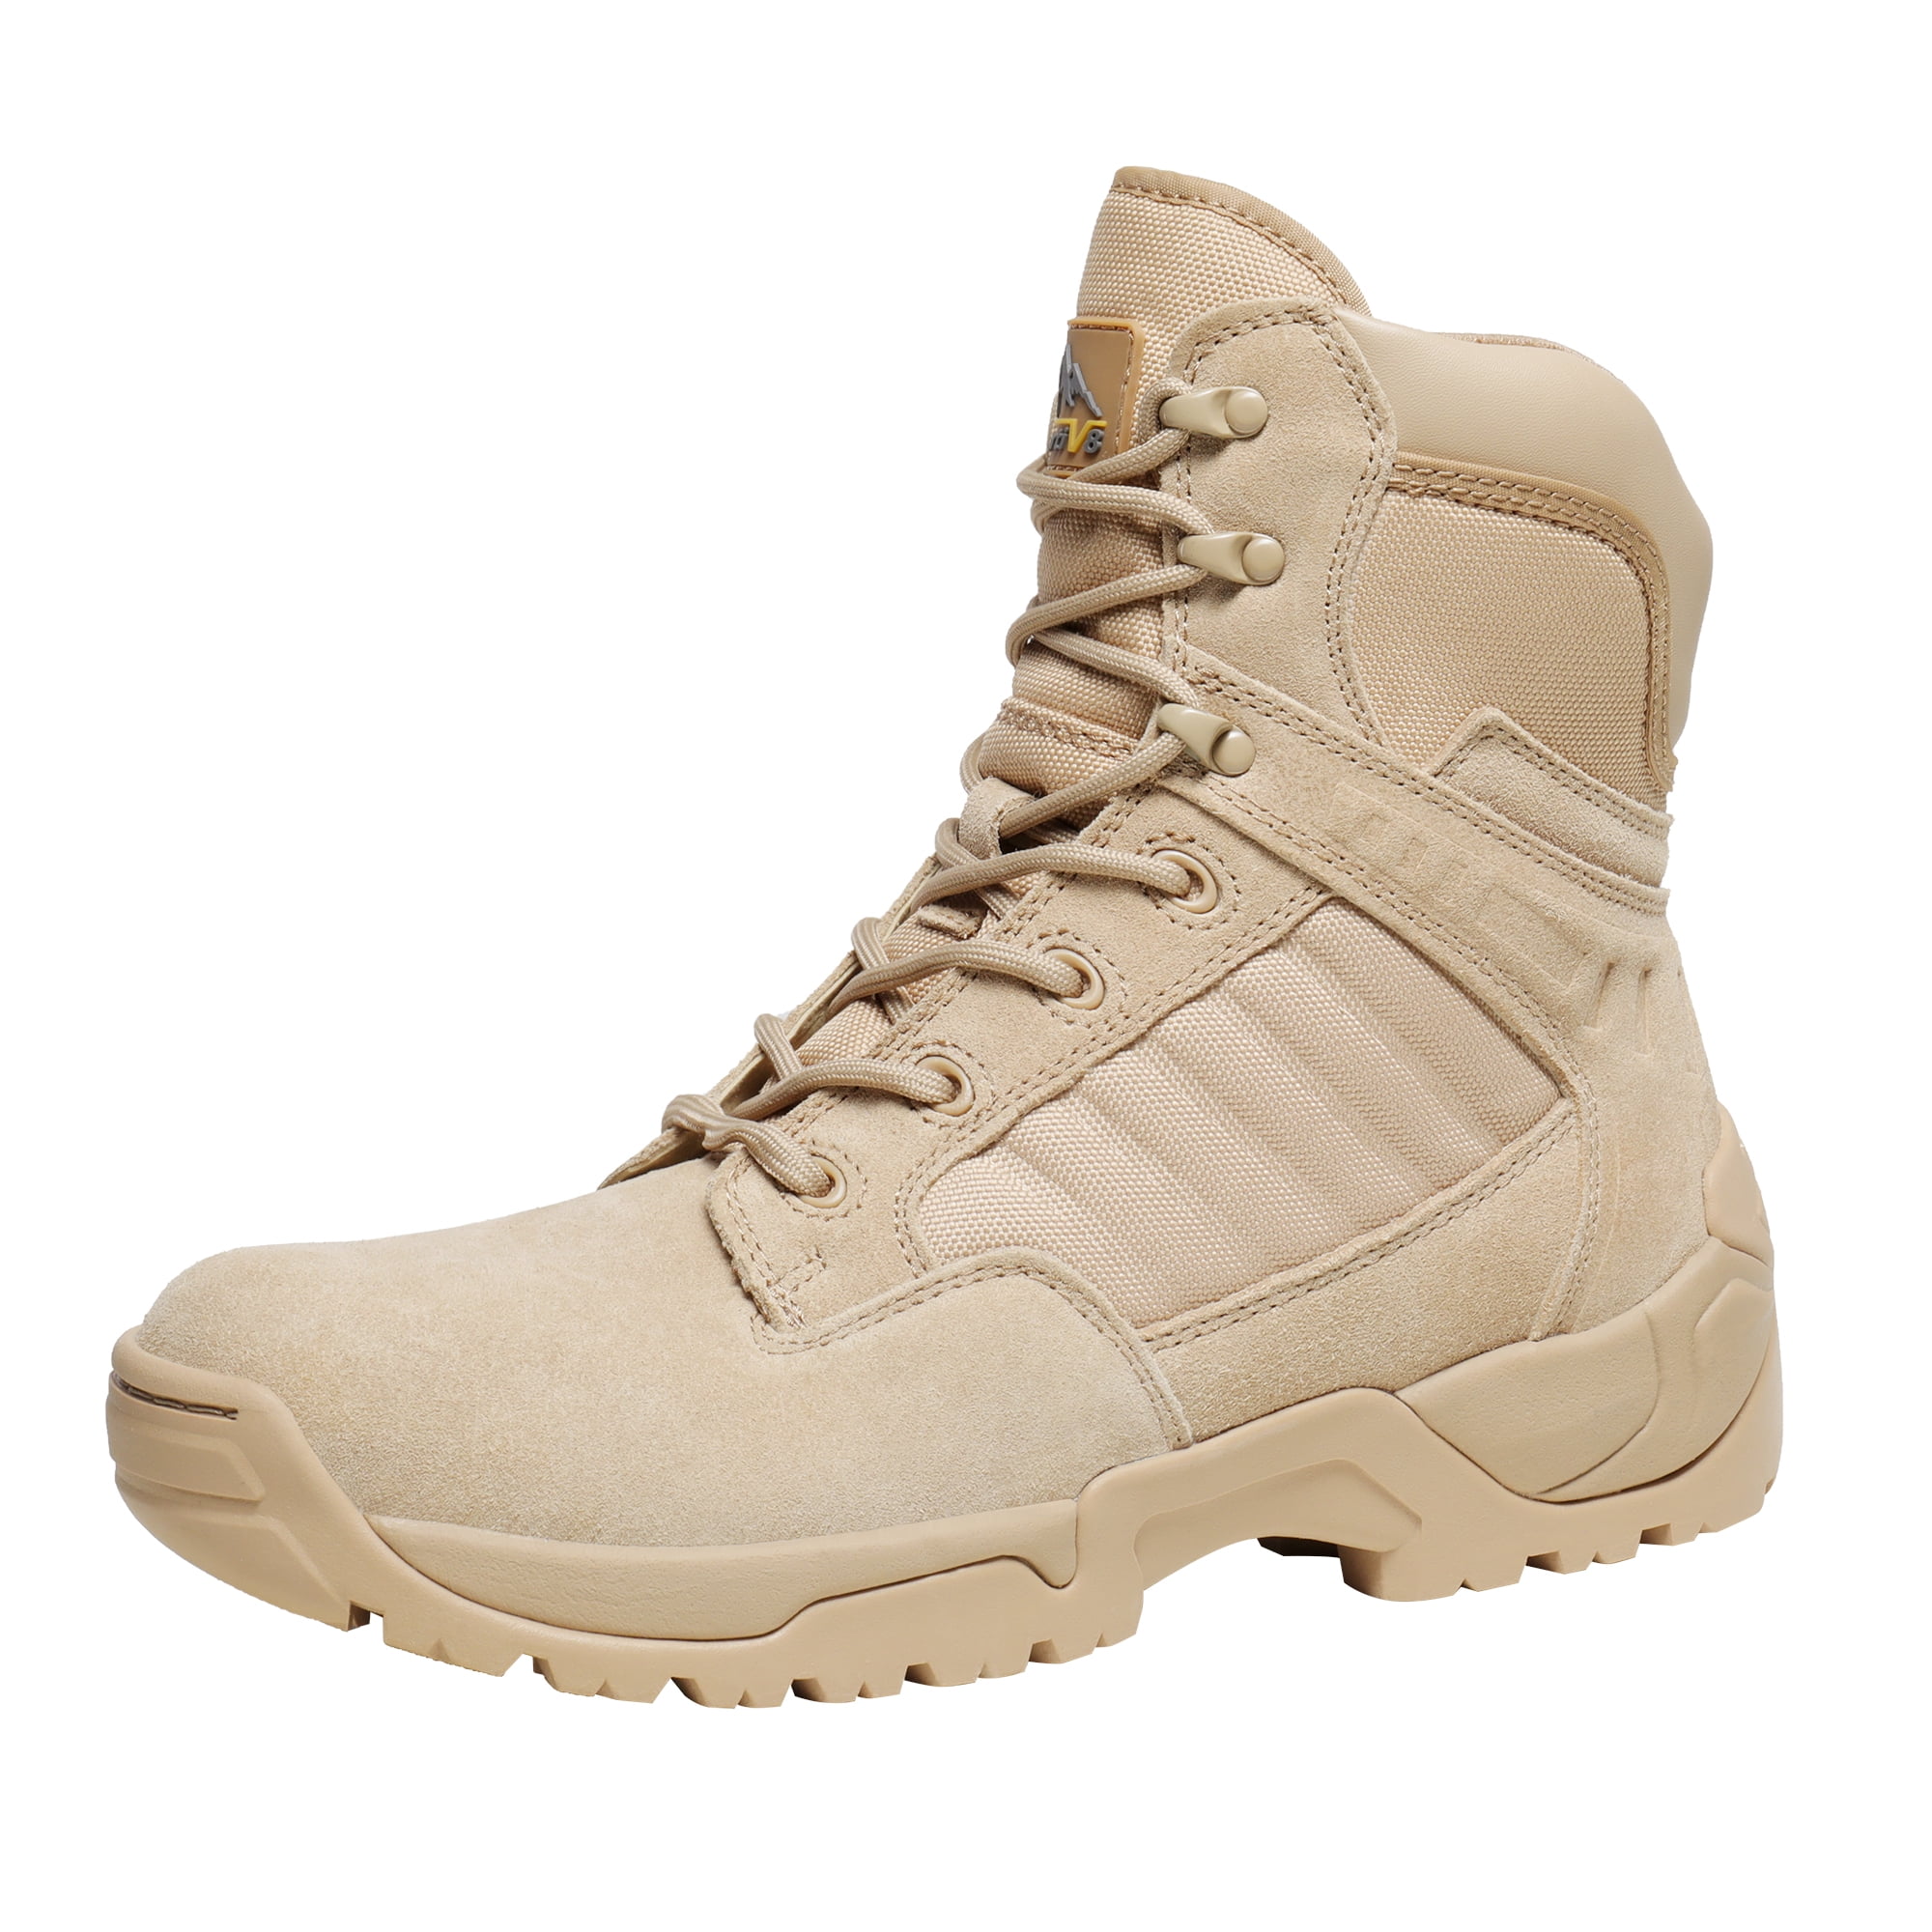 NORTIV 8 Men's Military Tactical Work Boots Hiking Motorcycle Combat Boots 